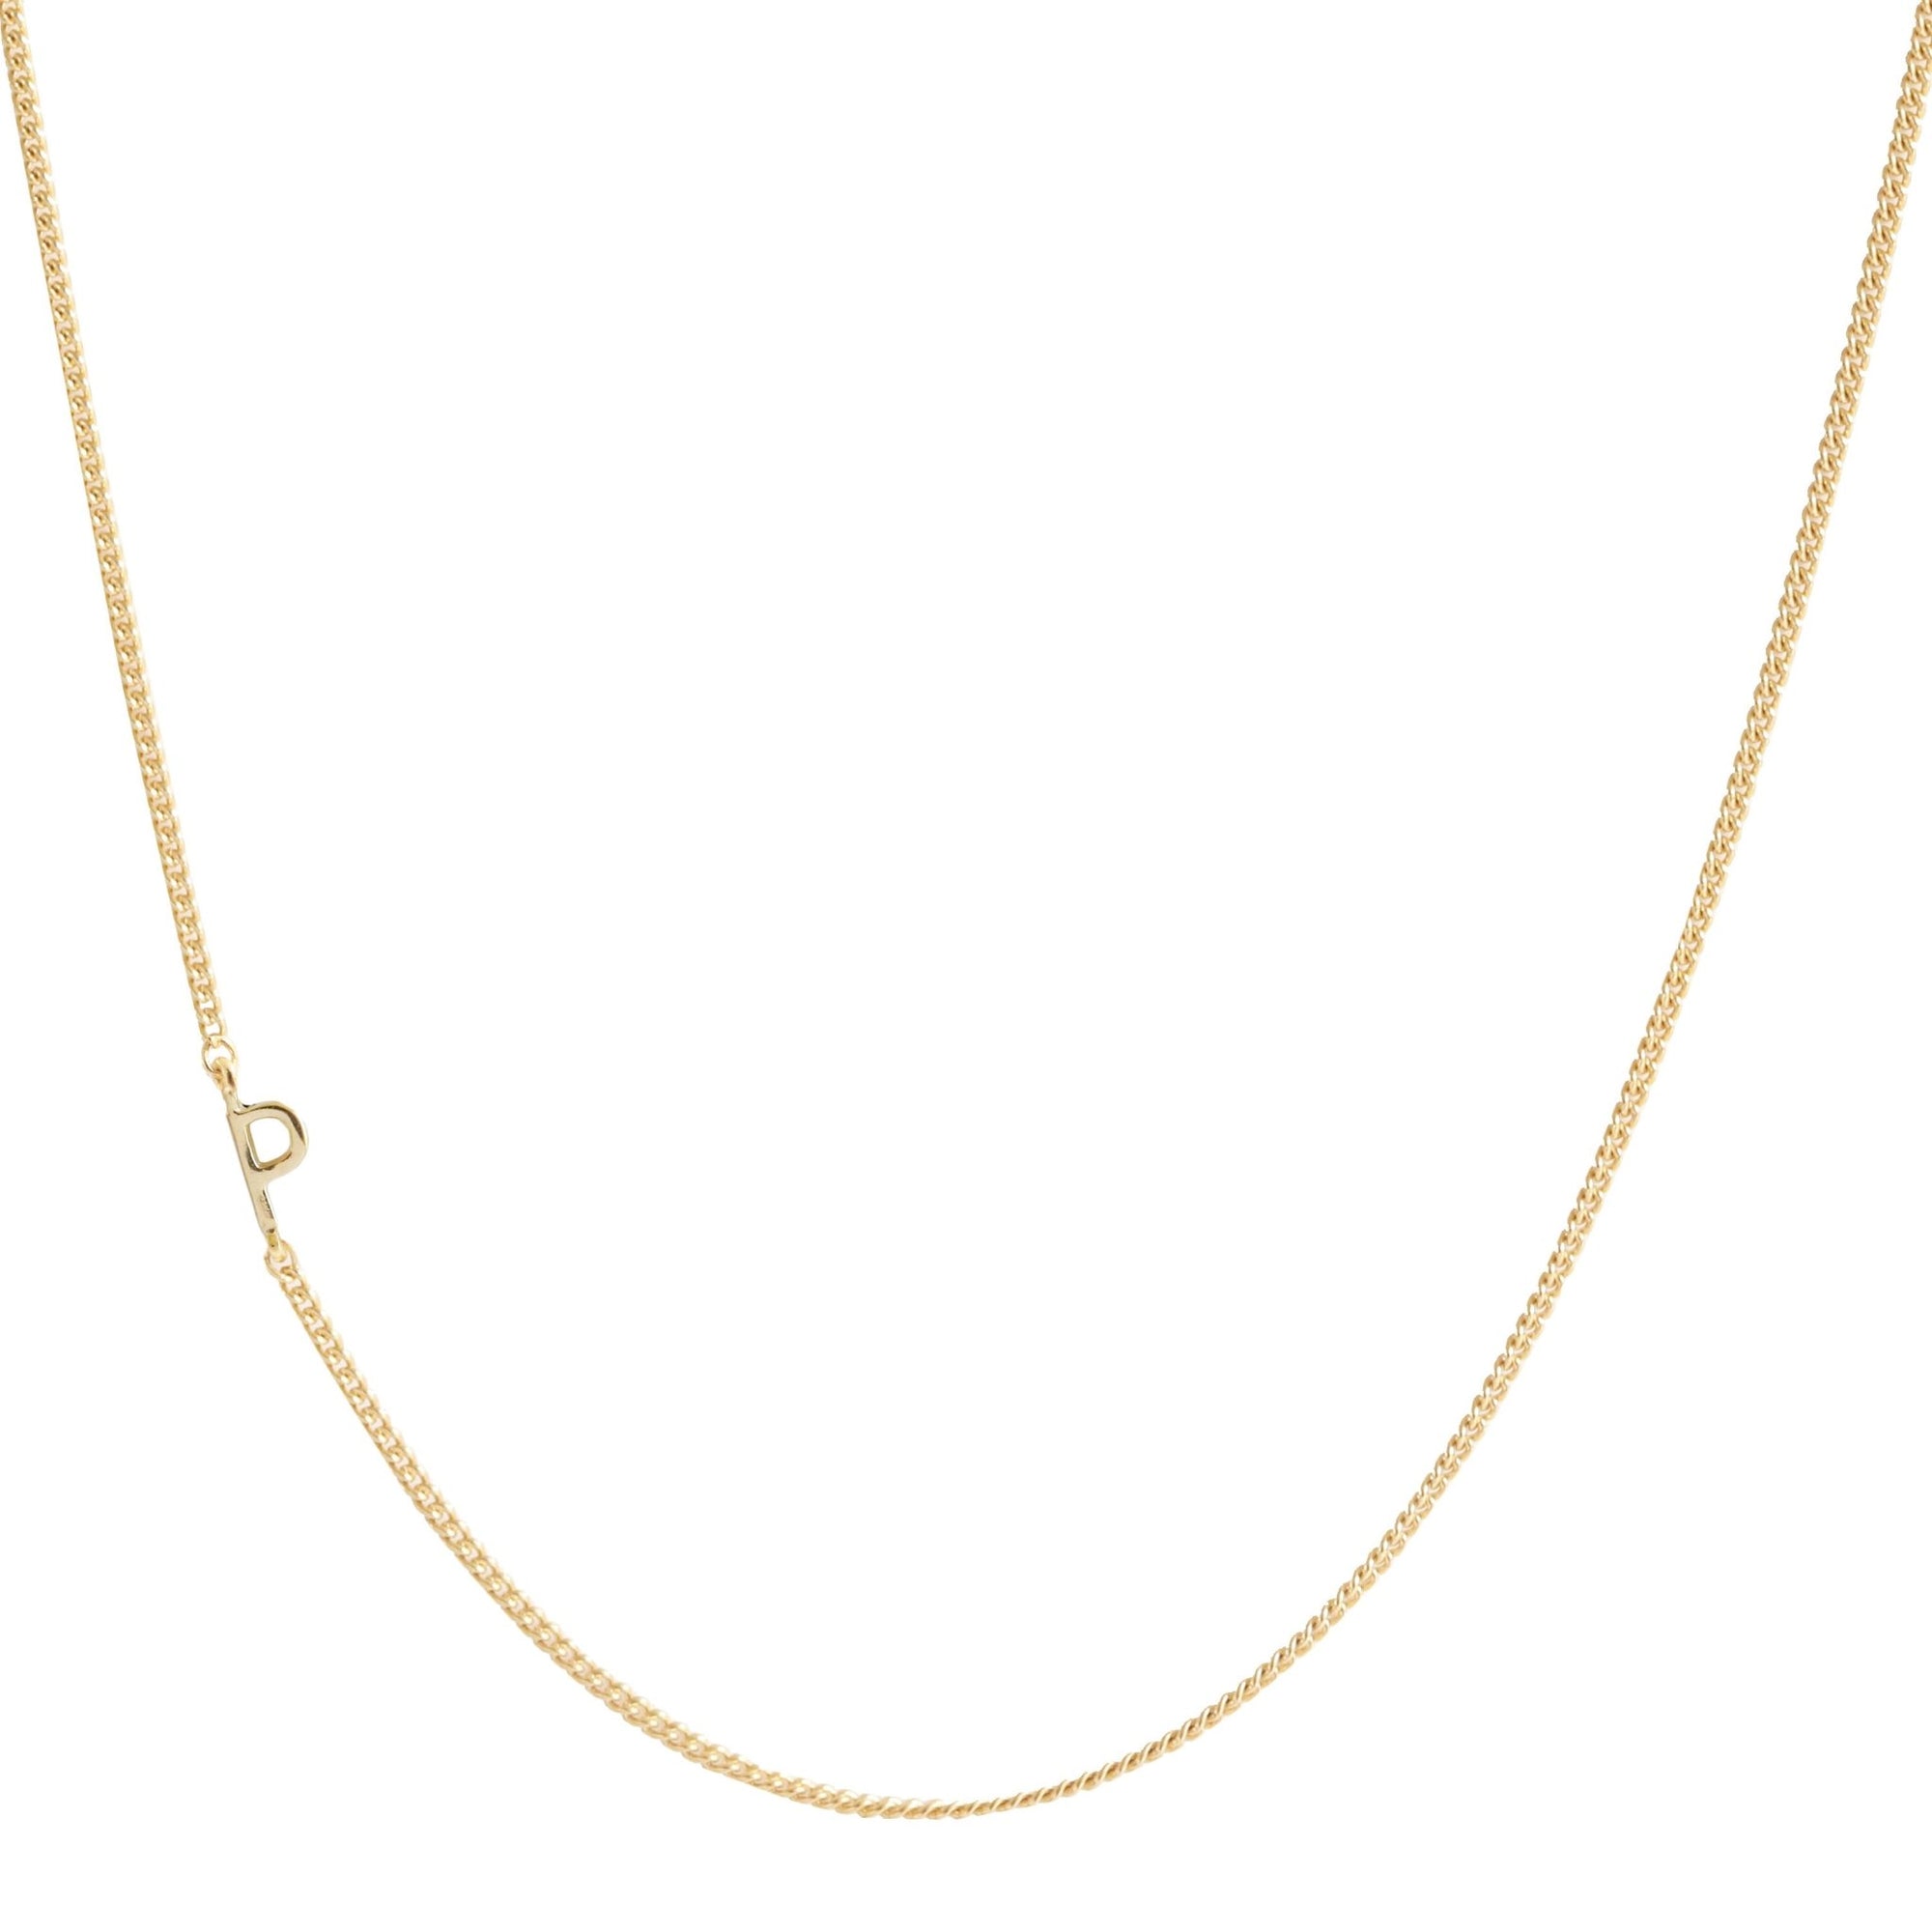 NOTABLE OFFSET INITIAL NECKLACE - P - GOLD - SO PRETTY CARA COTTER